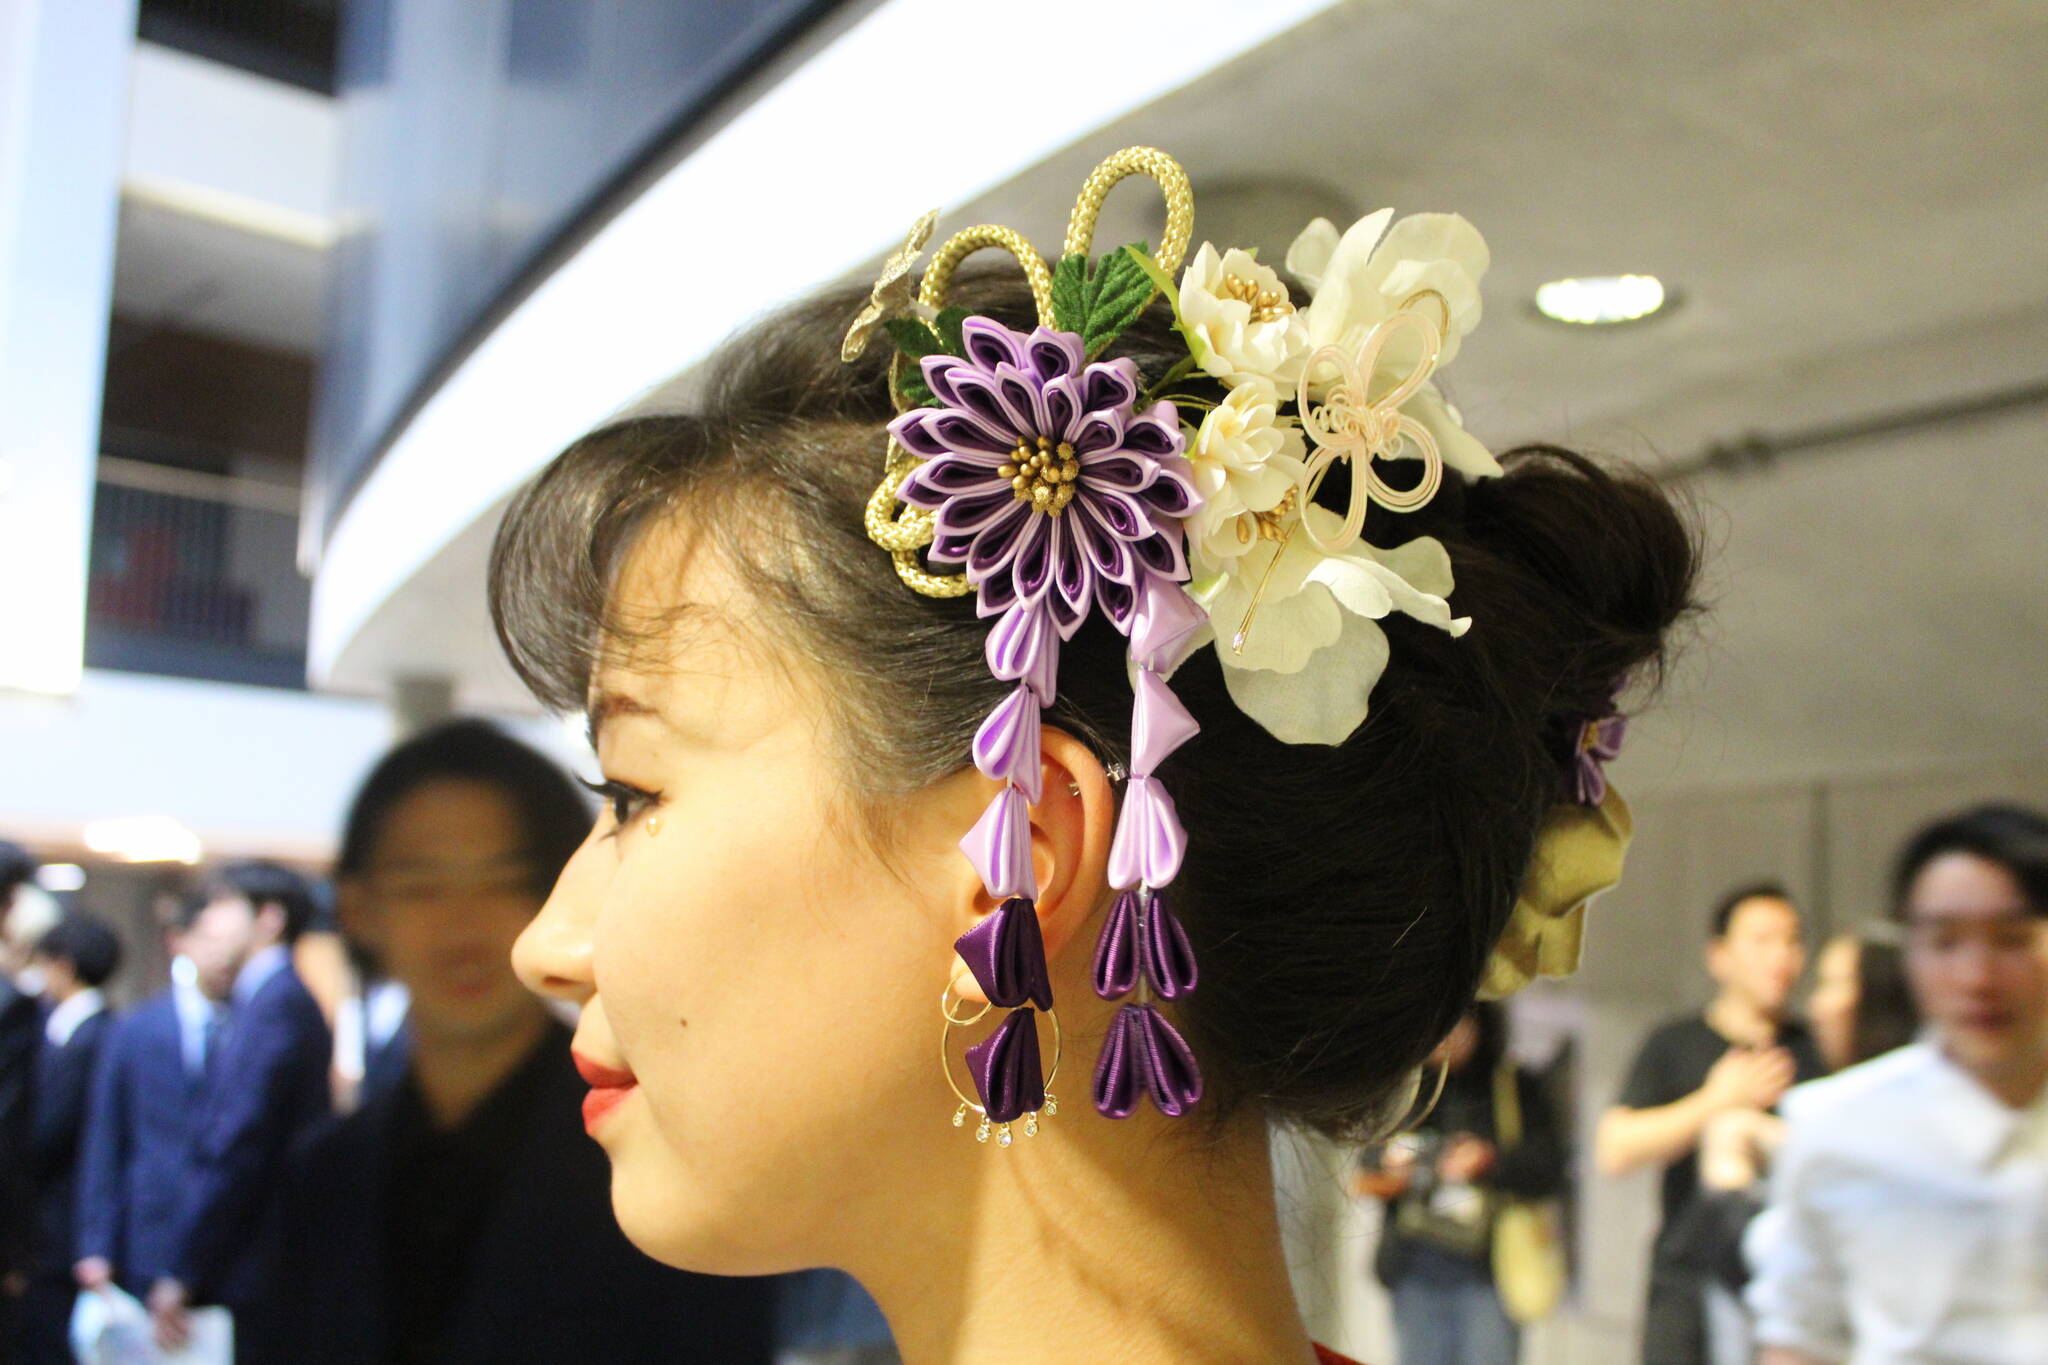 Bailey Jo Josie/Sound Publishing
Iona Hillman wore traditional Japanese hair adornments for Coming-of-Age Day.